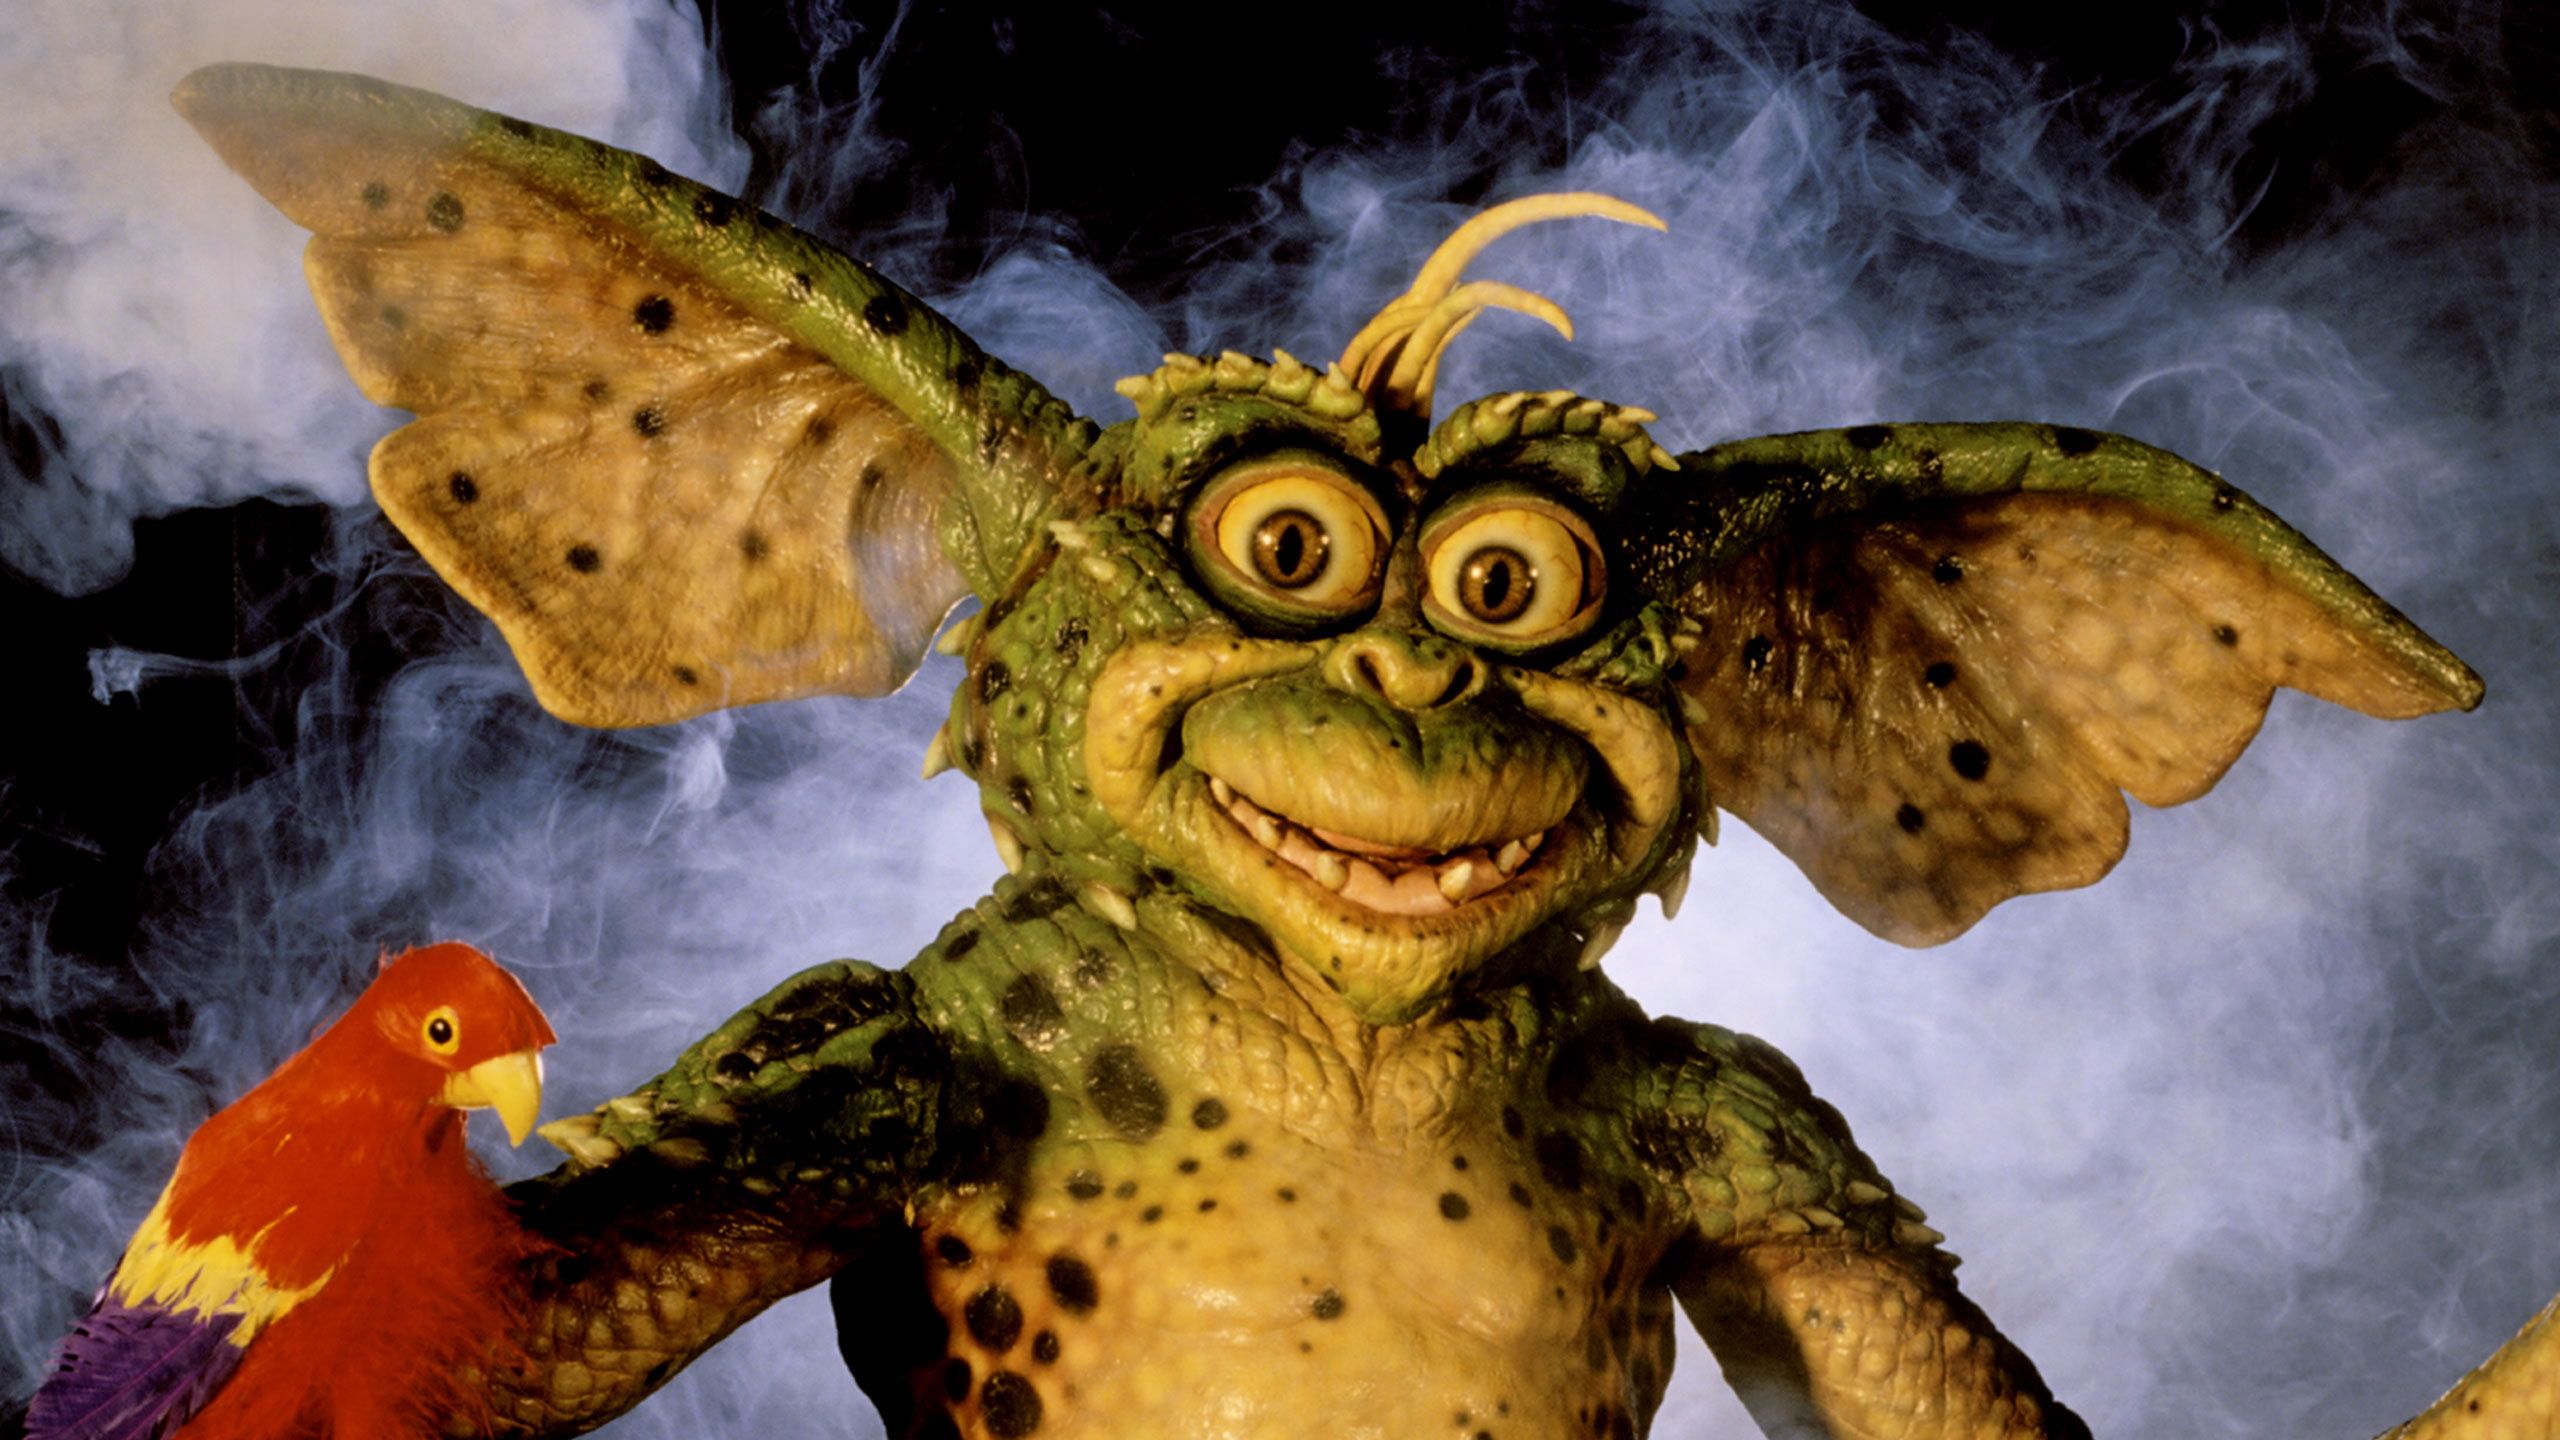 gizmo from gremlins in the new labyrinth movie : r/dalle2